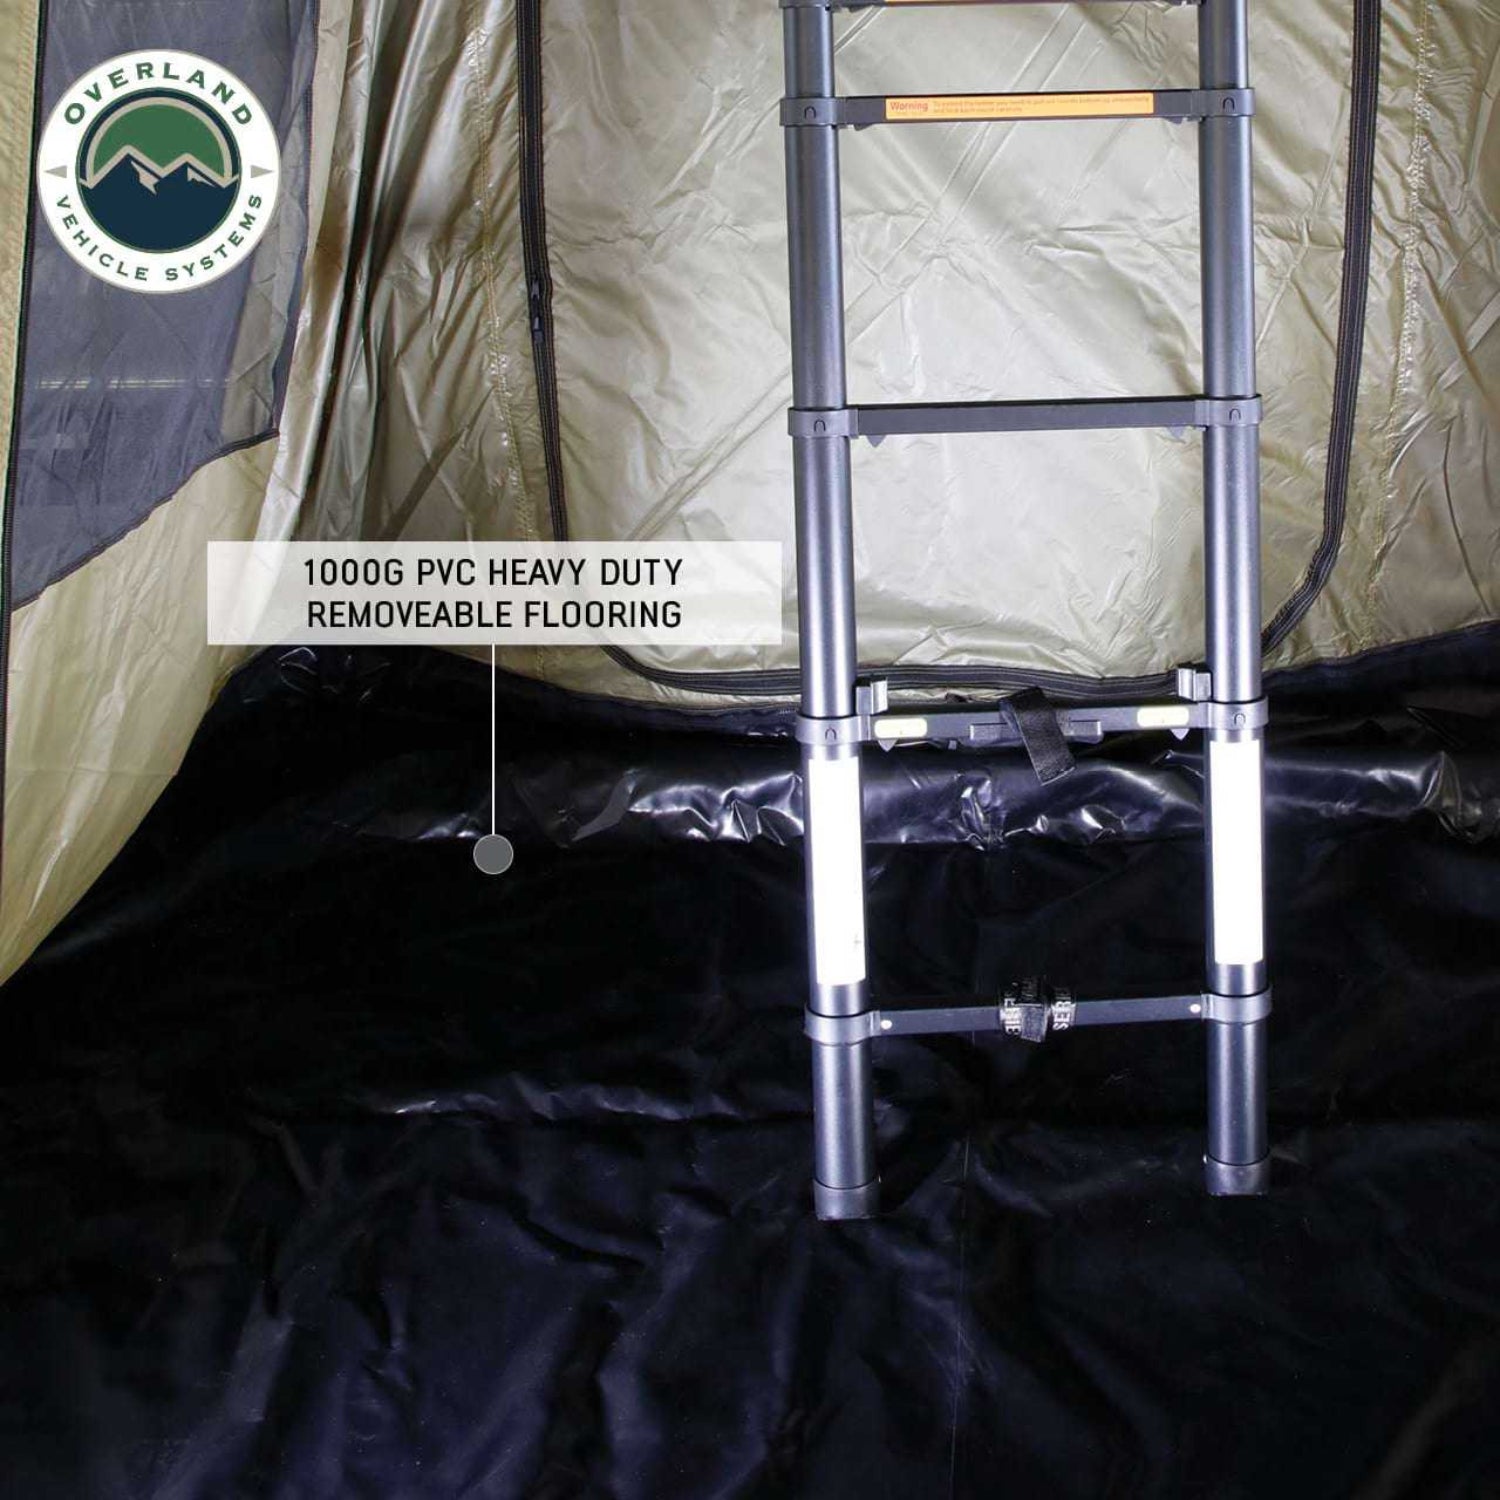 Overland Vehicle Systems Nomadic 4 Roof Top Tent Annex Green Base With Black Floor